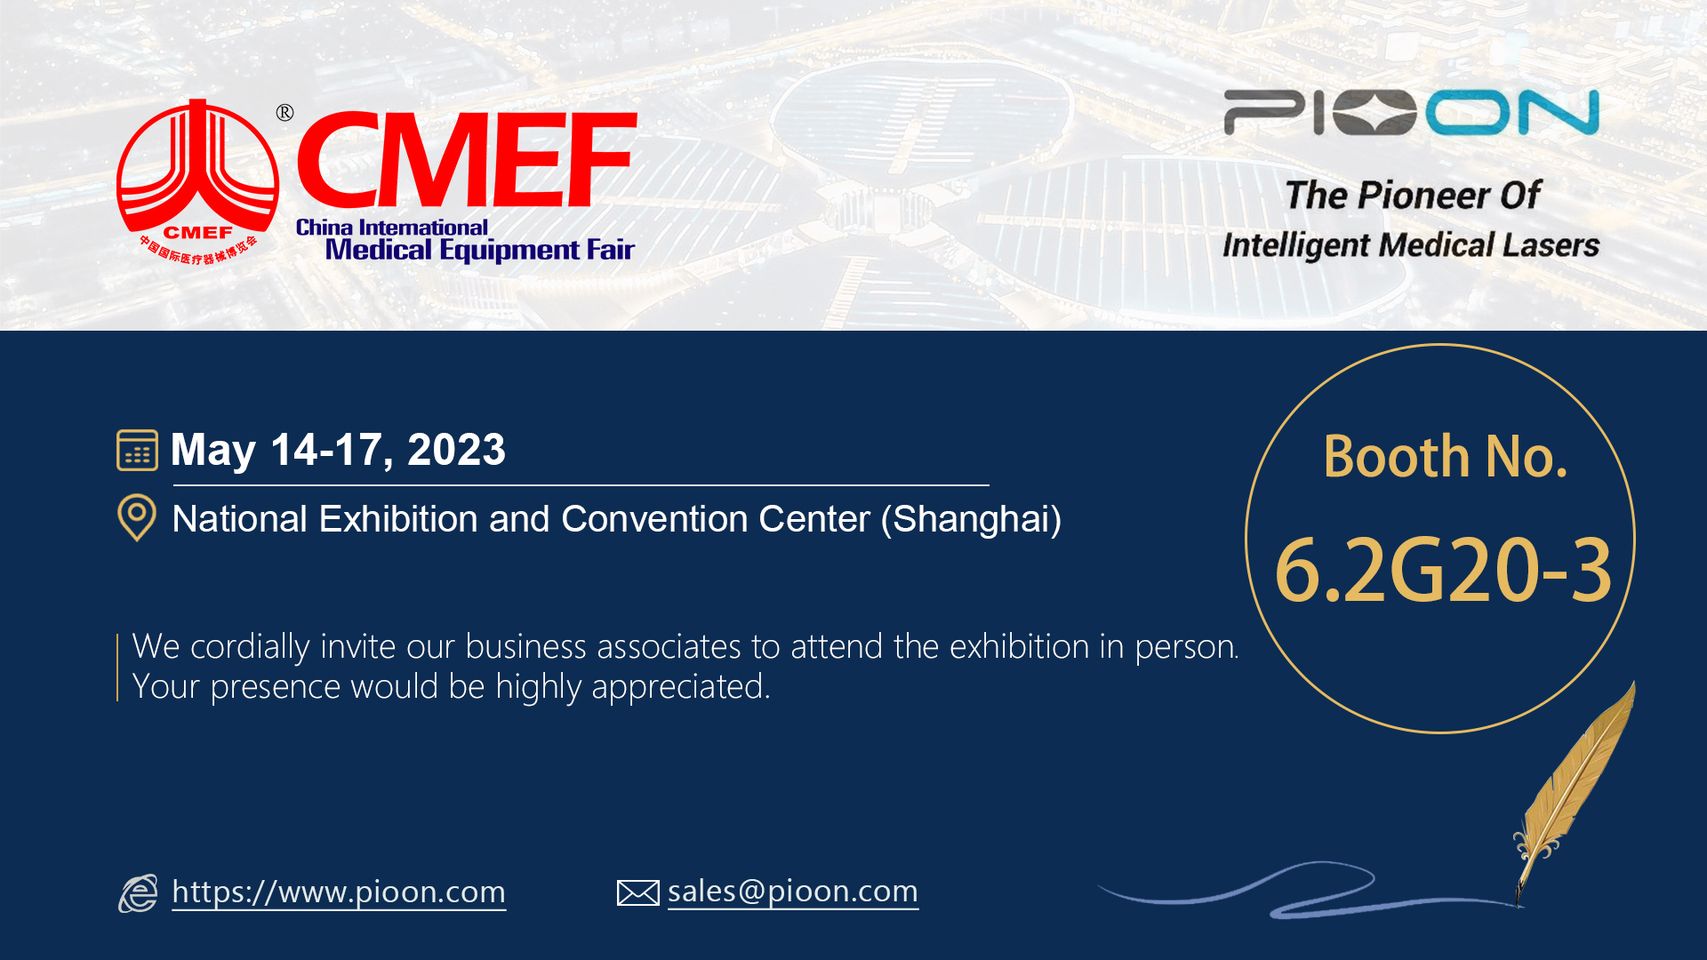  The 2023 CMEF Exhibition is coming soon